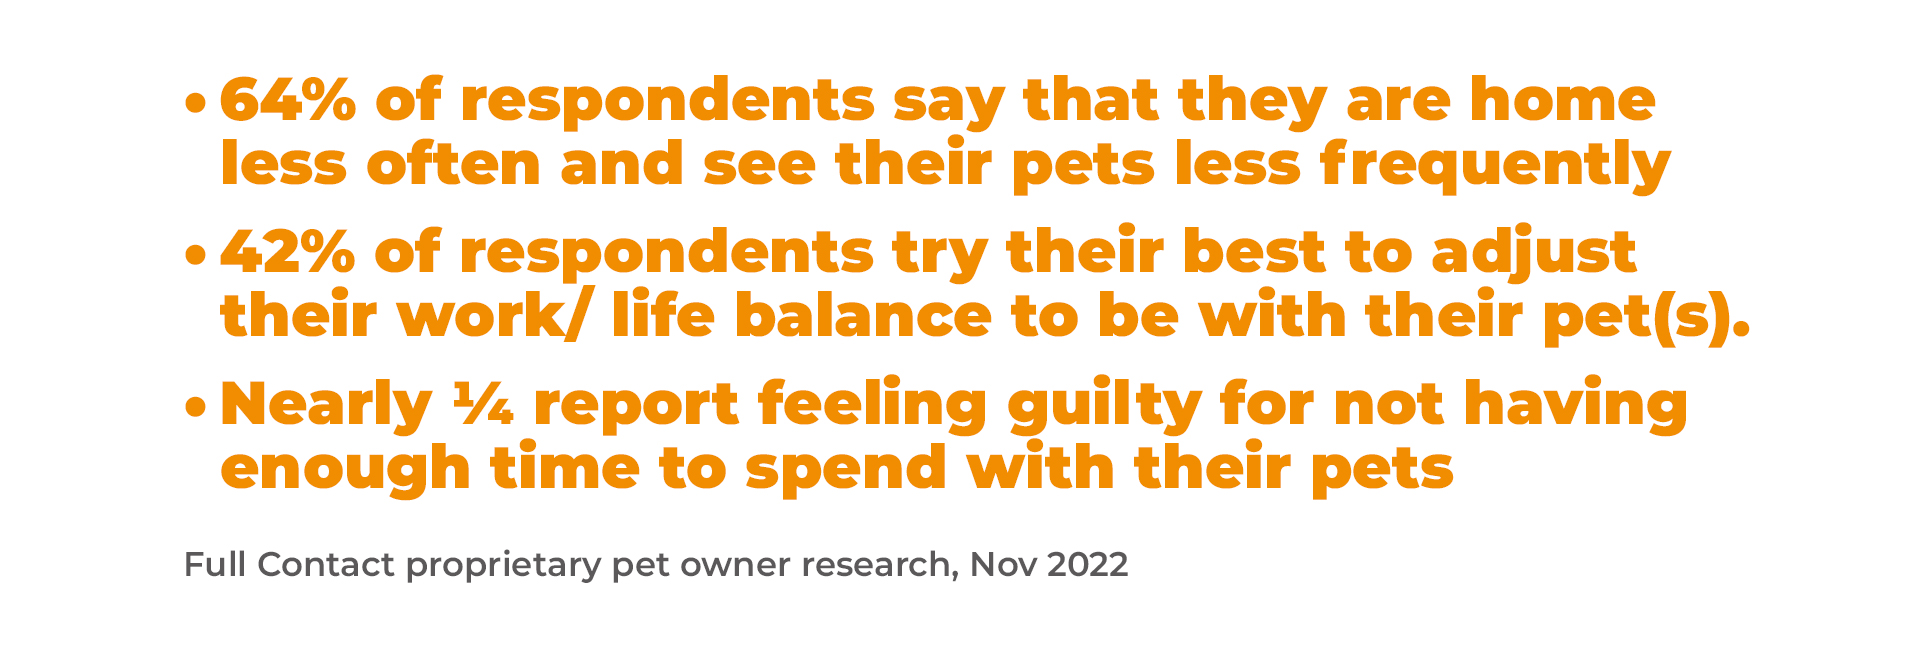 •64% of respondents say that they are home less often and see their pets less frequently • 42% of respondents try their best to adjust their work/ life balance to be with their pet(s). • Nearly ¼ report feeling guilty for not having enough time to spend with their pets 